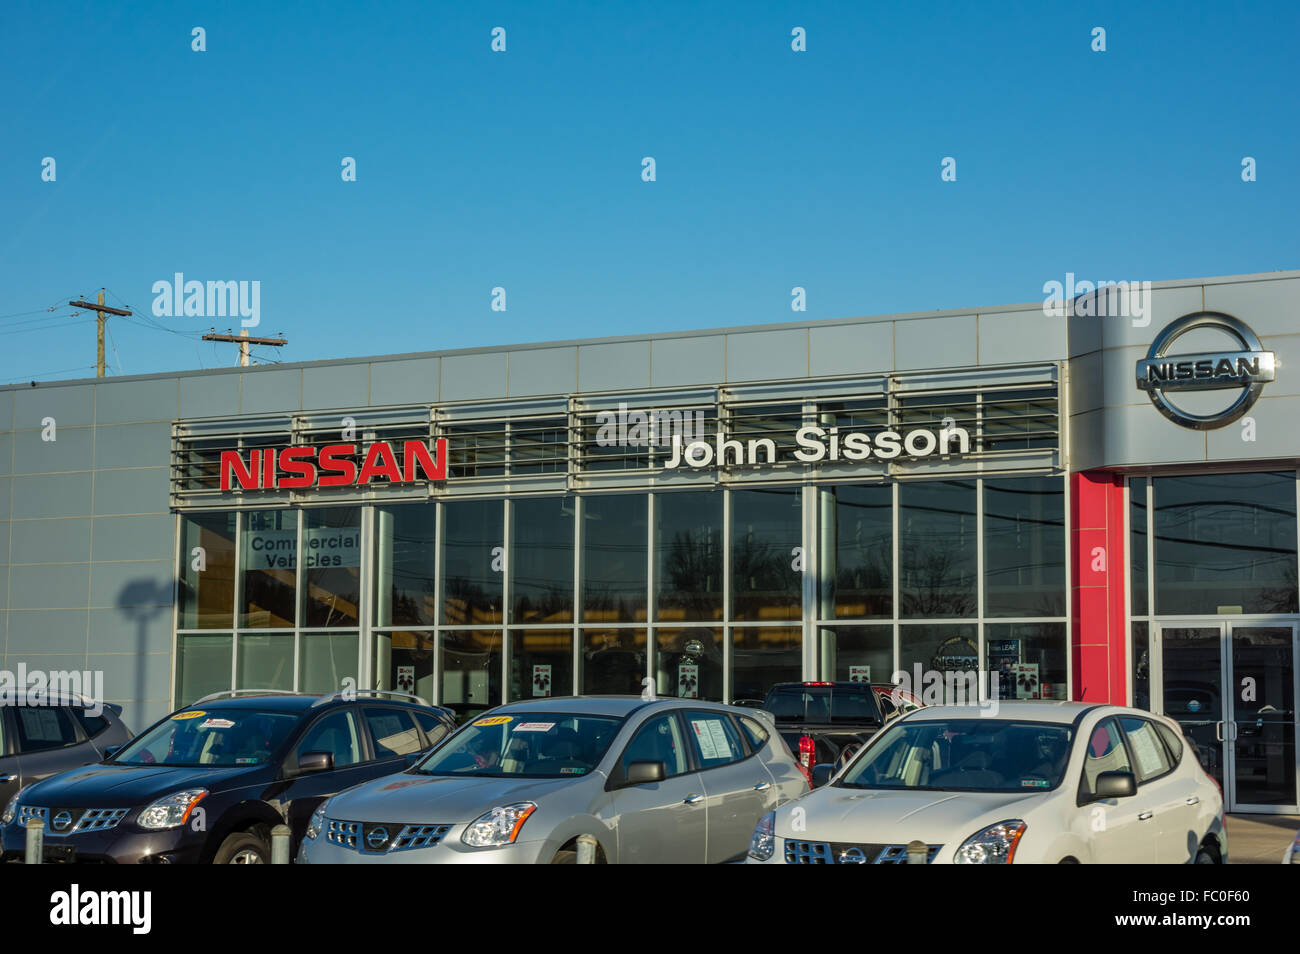 John Sisson Nissan dealership with cars for sale on the lot.  Portland, Oregon Stock Photo